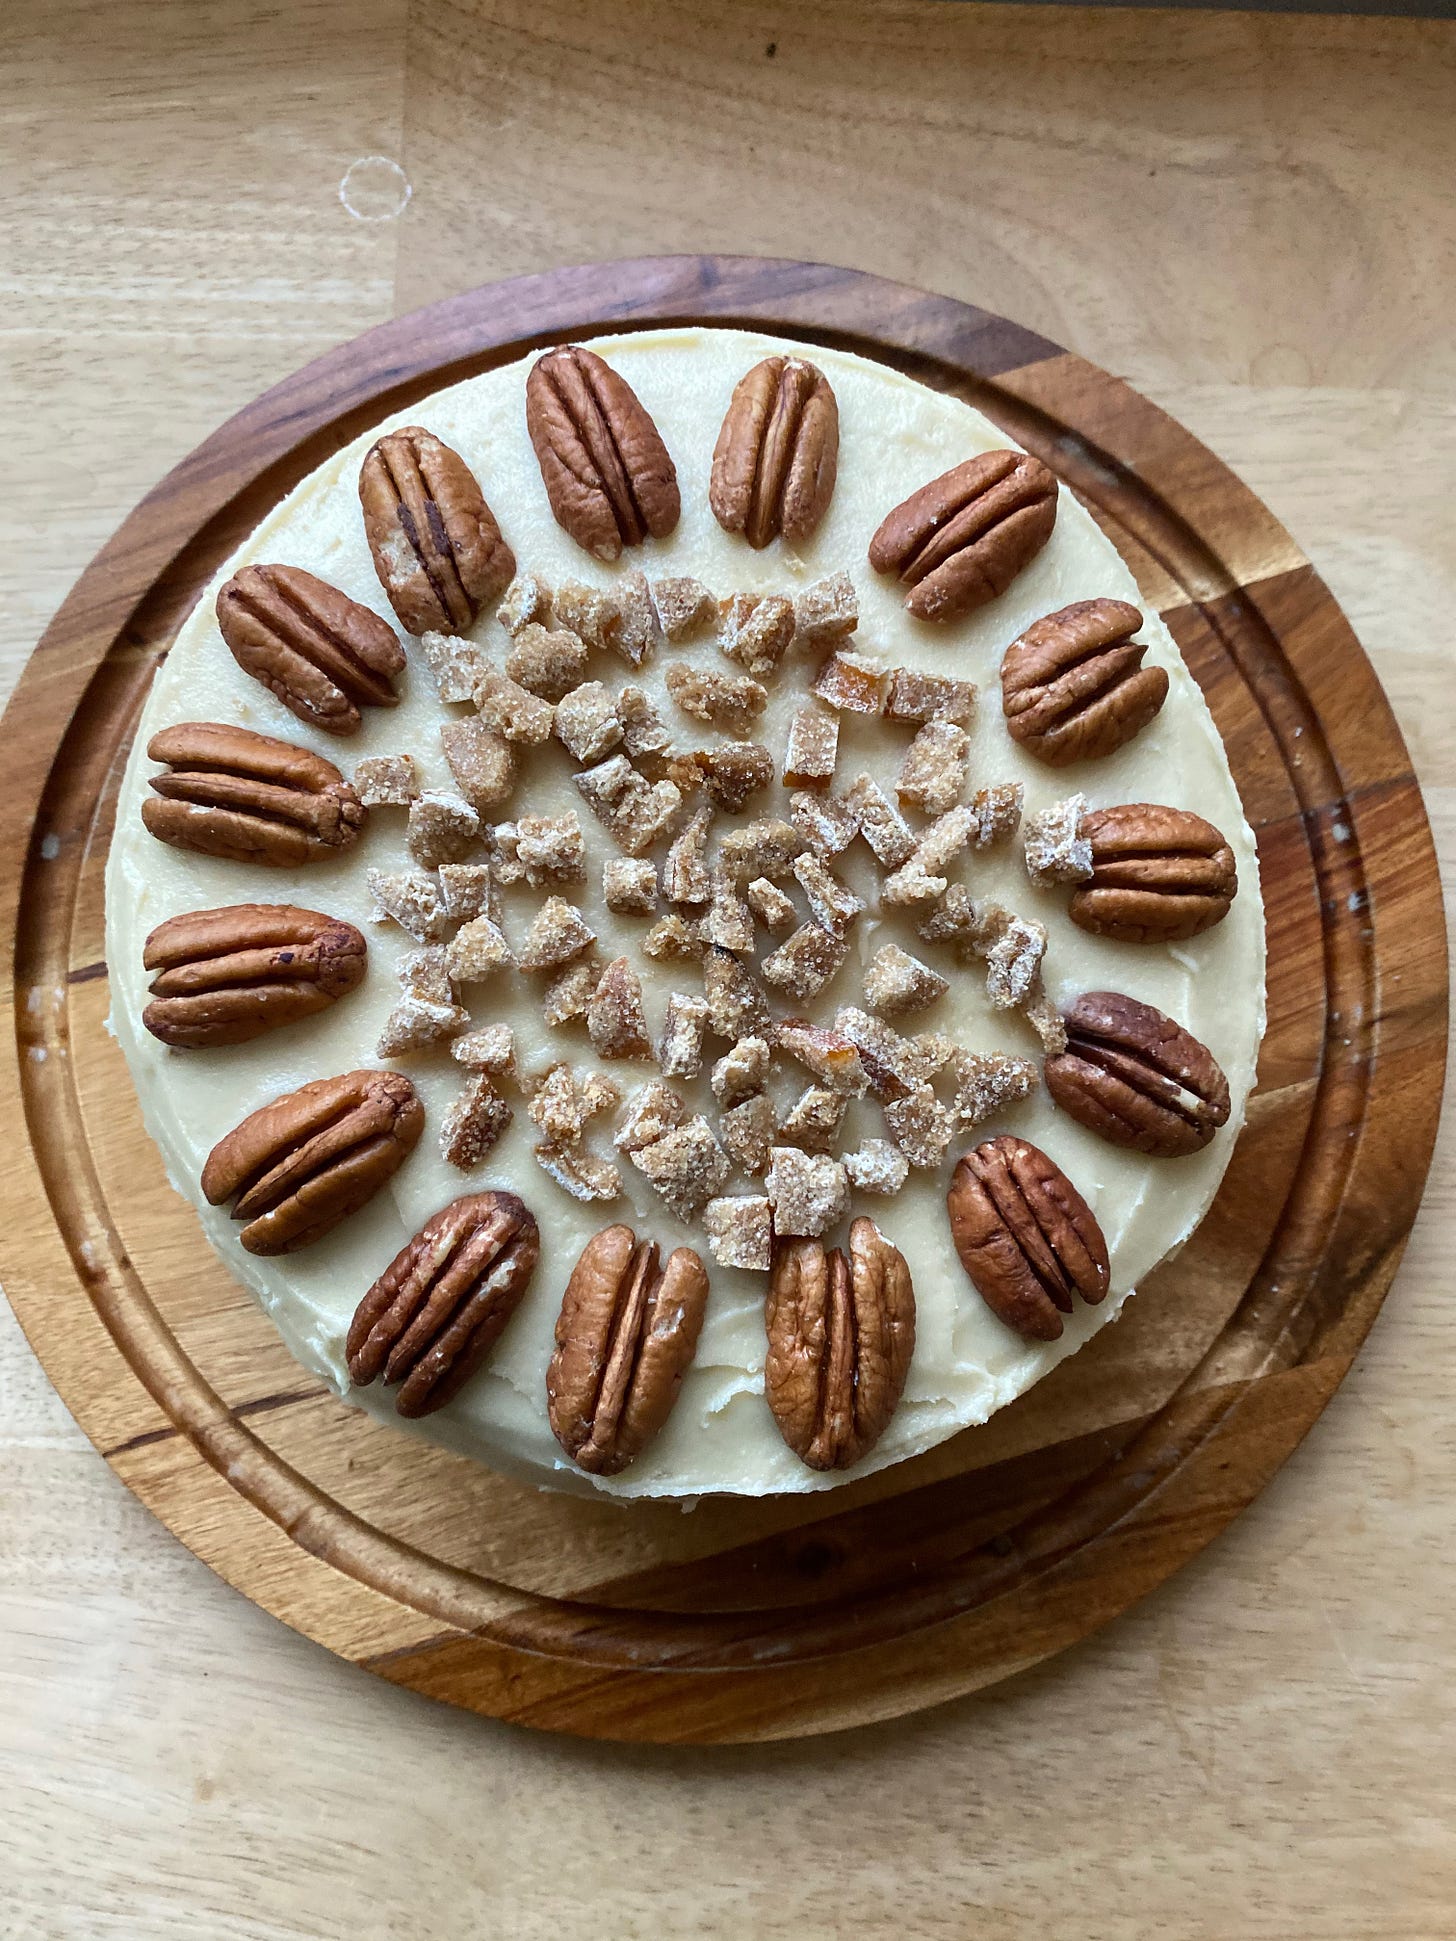 A round cake covered in creamy frosting sits on a wooden platter. It is decorated with a ring of pecan halves, and sprinkled with chopped candied orange peel.